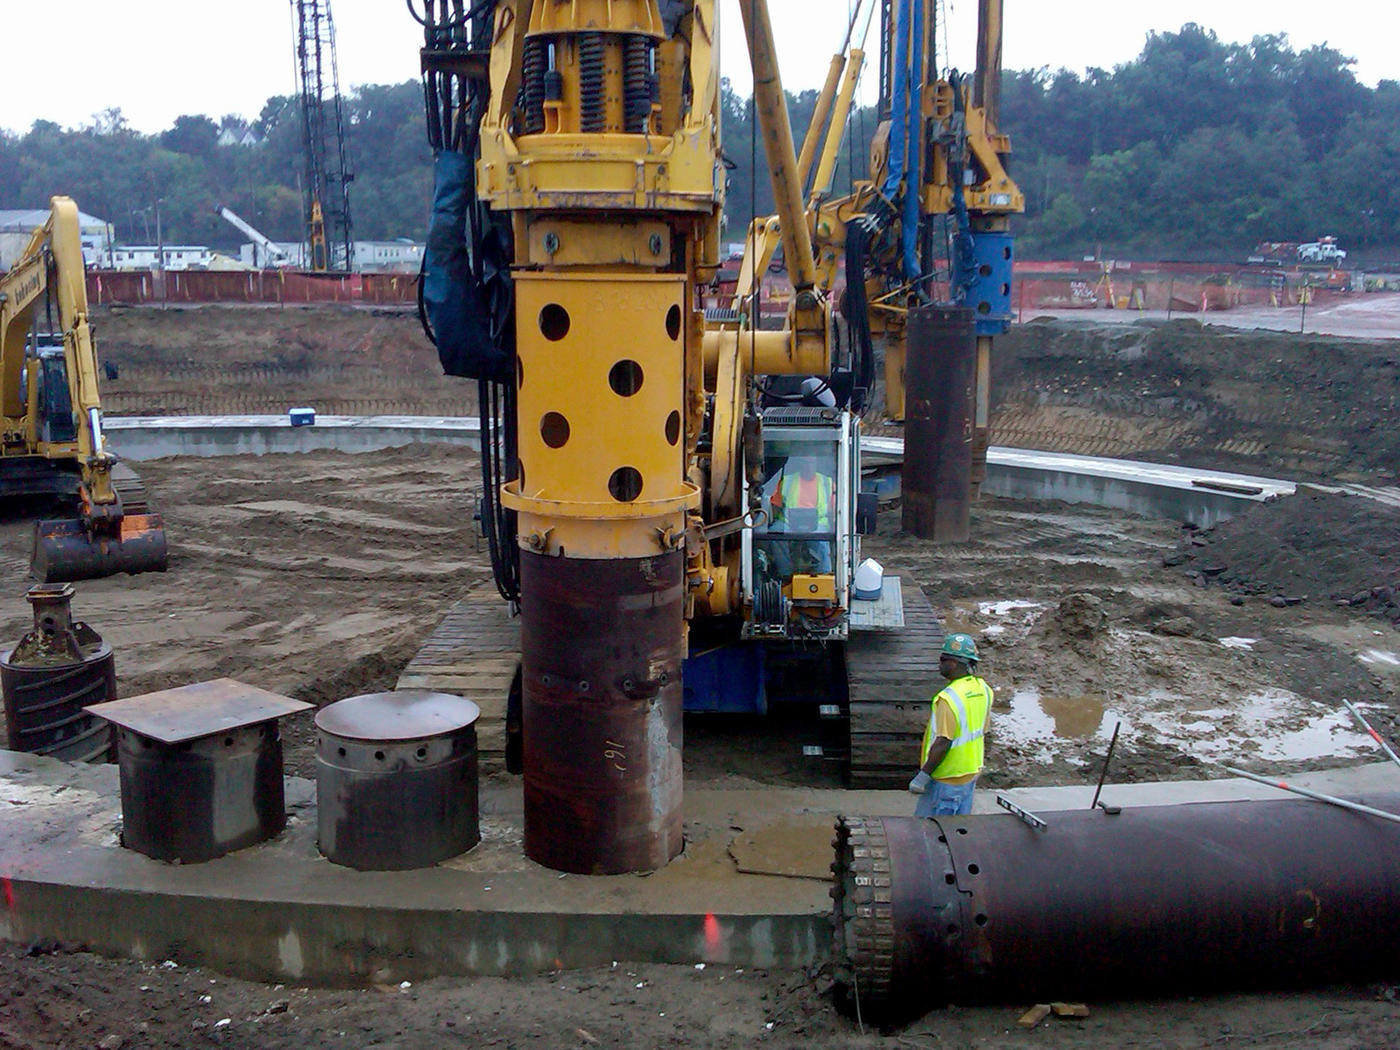 ATI Hot-Rolling and Processing Facility secant piles